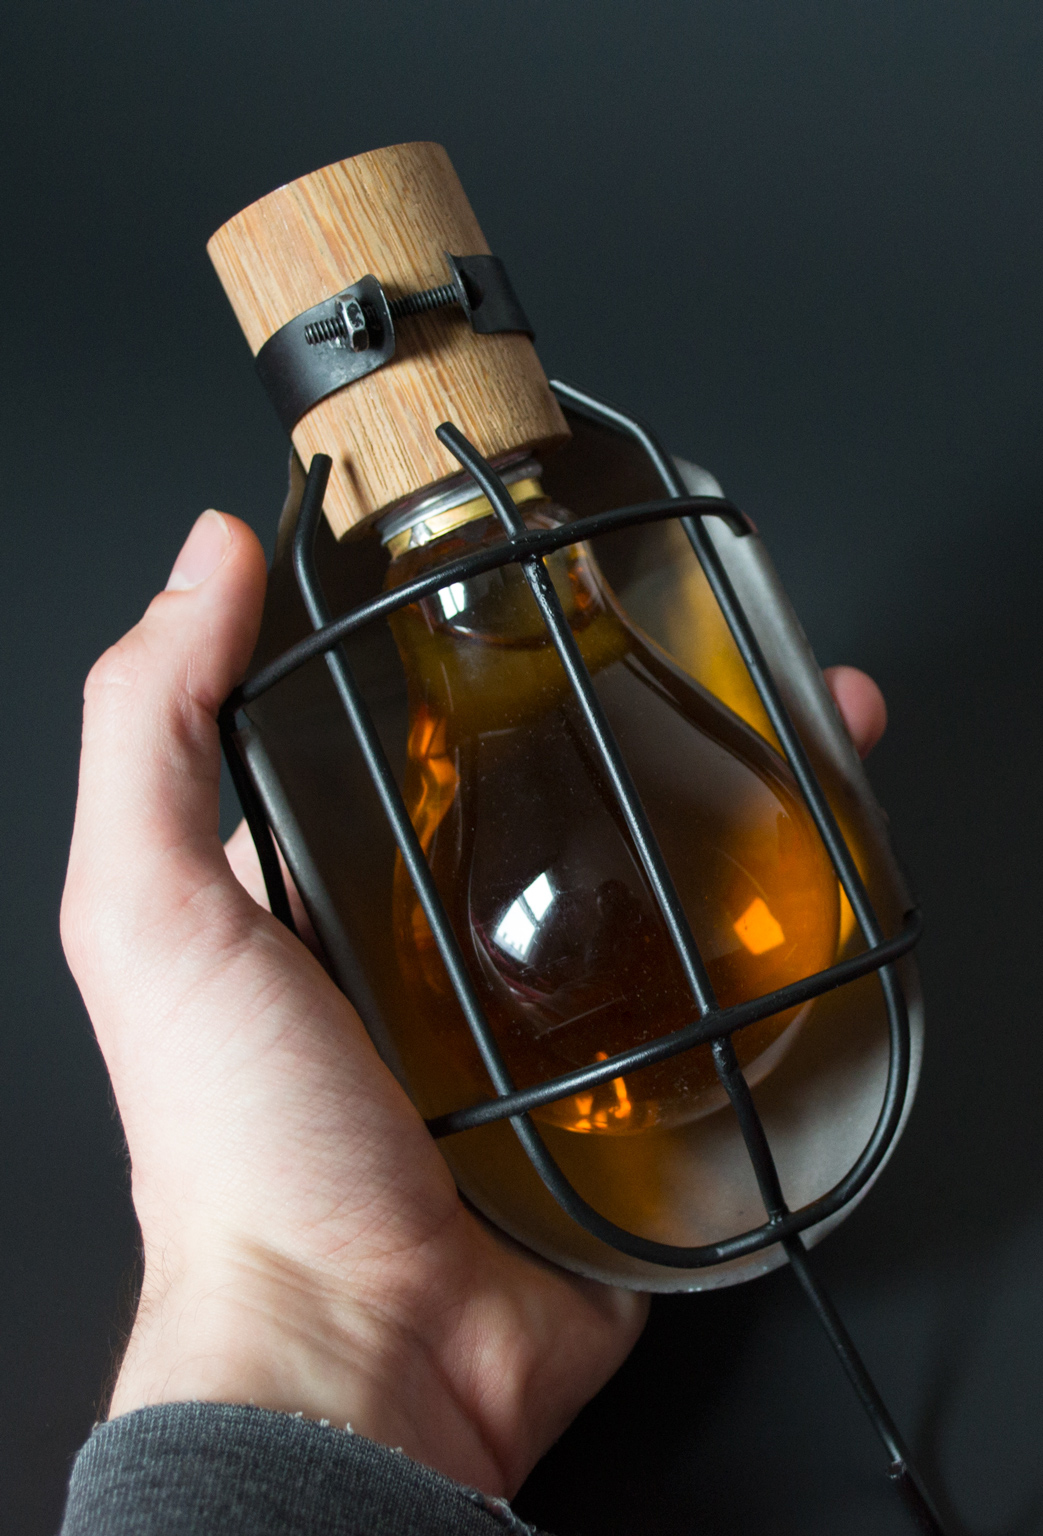 Whiskey scotch inspection lamp baladeuse Lightbulb alcohol alcool ampoule cachette Workshop atelier seriegraphie screen printing luxury luxe